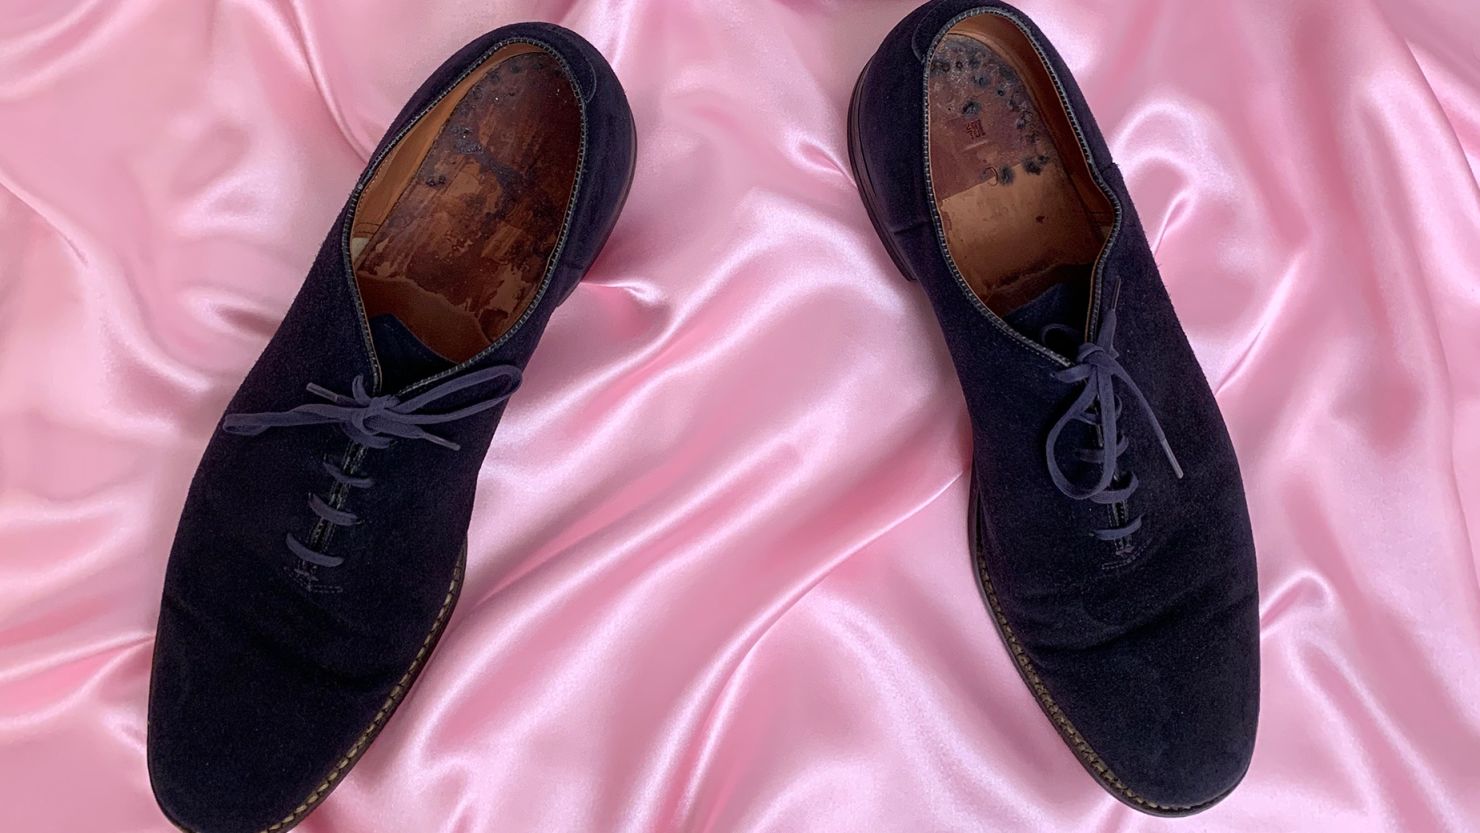 Elvis Presley's very own blue suede shoes were sold for £120,000 (around $152,000) to a buyer from California.